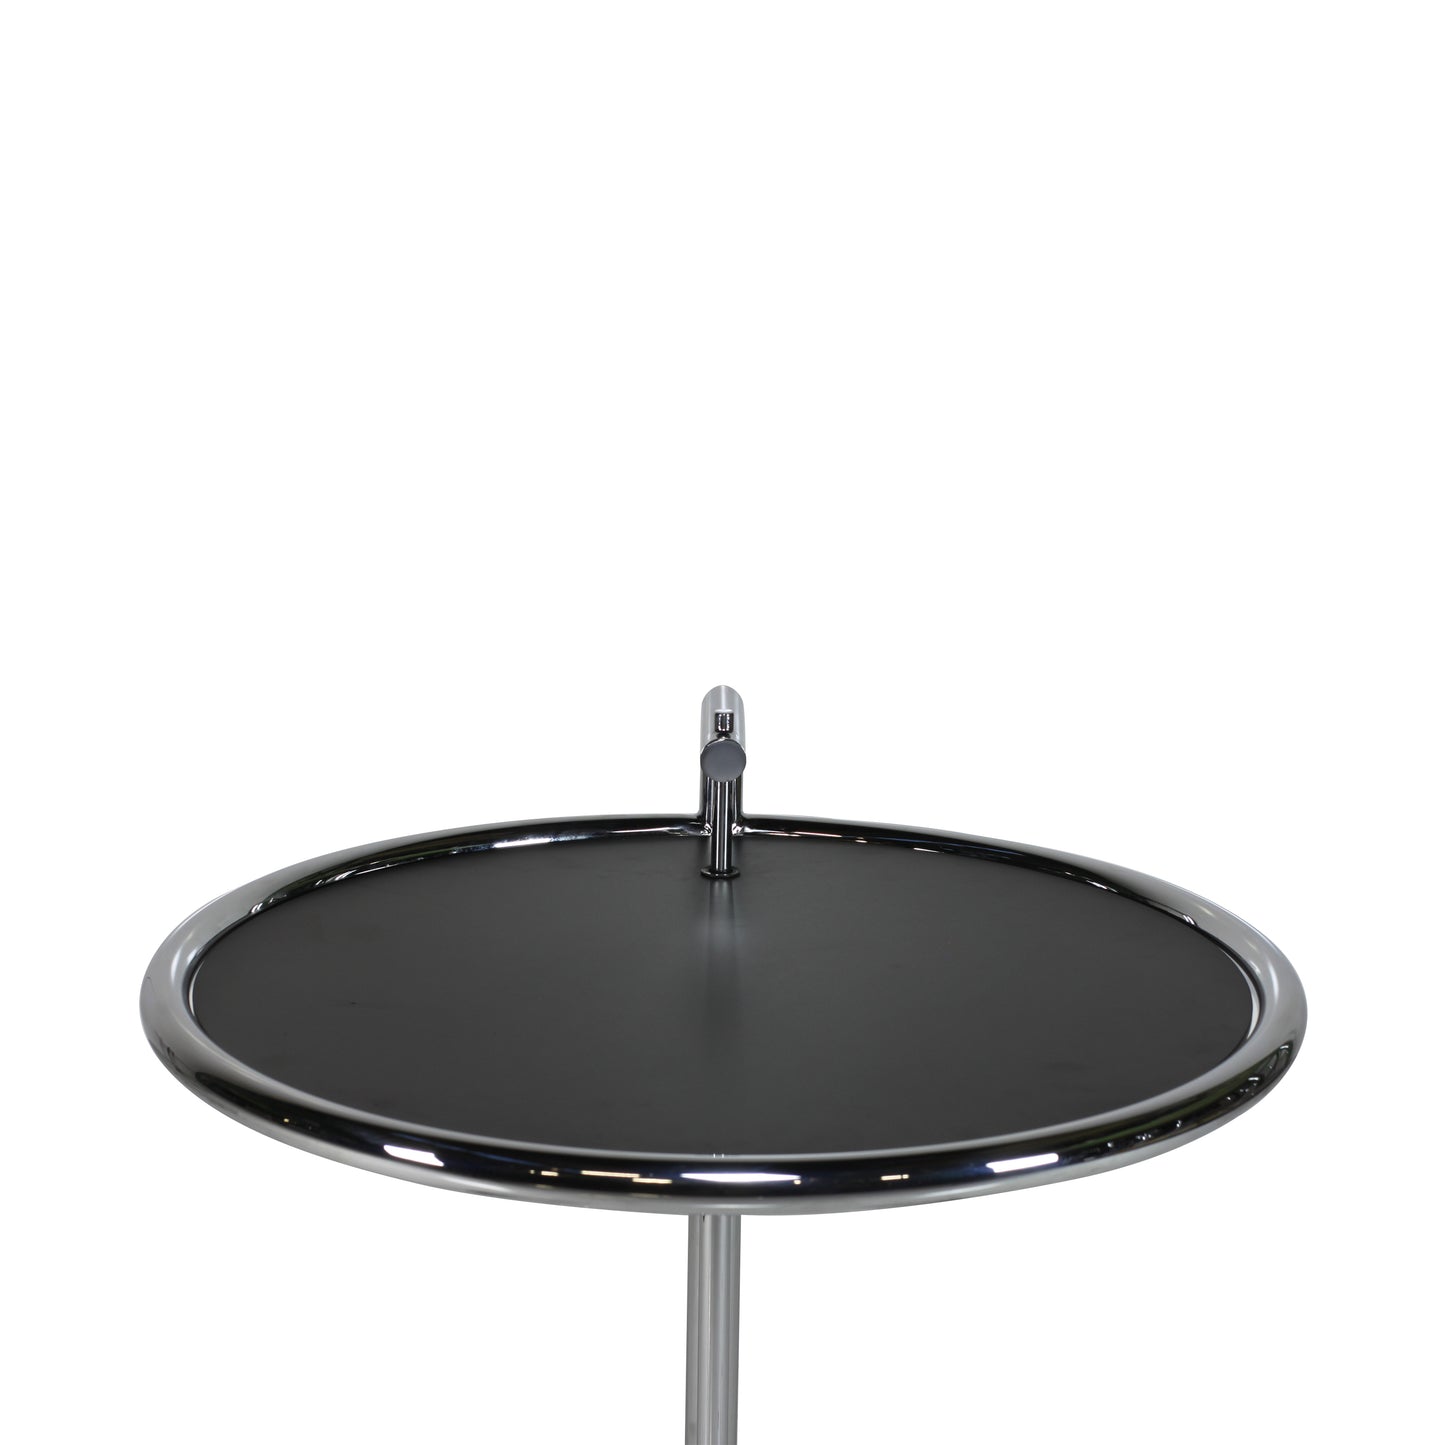 Adjustable table style | Chrome Black lacquered metal top | Side